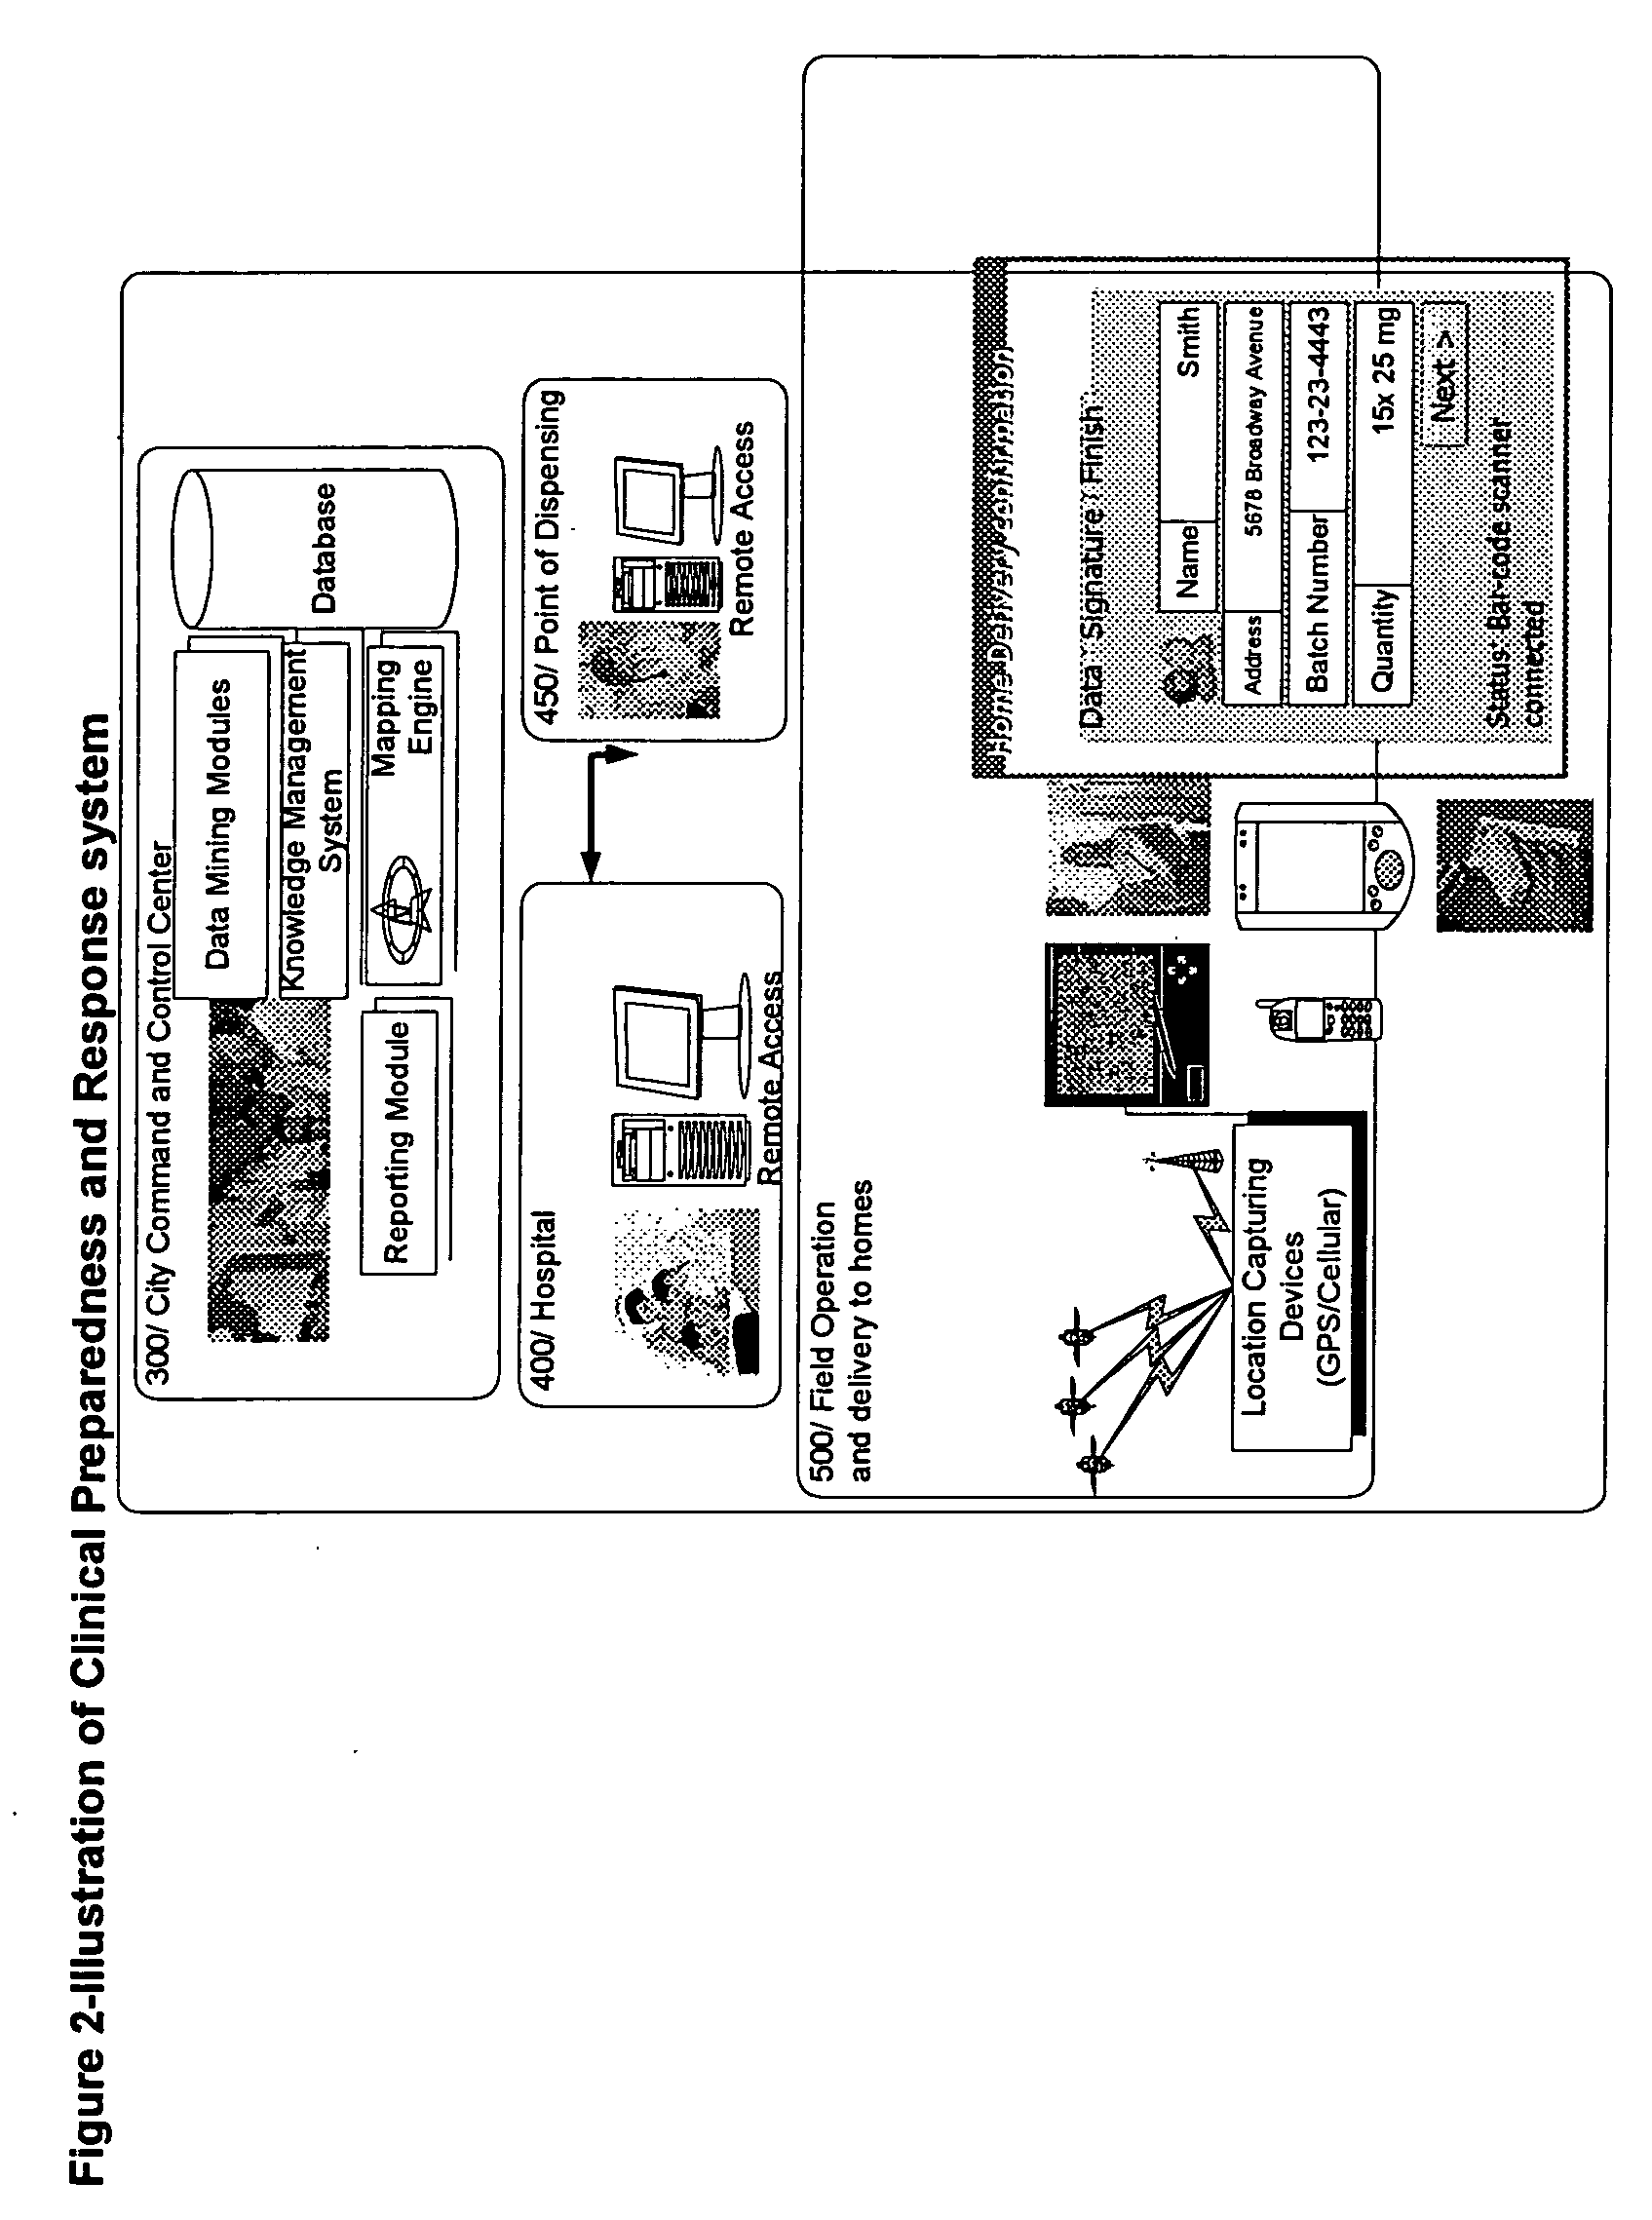 Method for accessing and analyzing medically related information from multiple sources collected into one or more databases for deriving illness probability and/or for generating alerts for the detection of emergency events relating to disease management including HIV and SARS, and for syndromic surveillance of infectious disease and for predicting risk of adverse events to one or more drugs